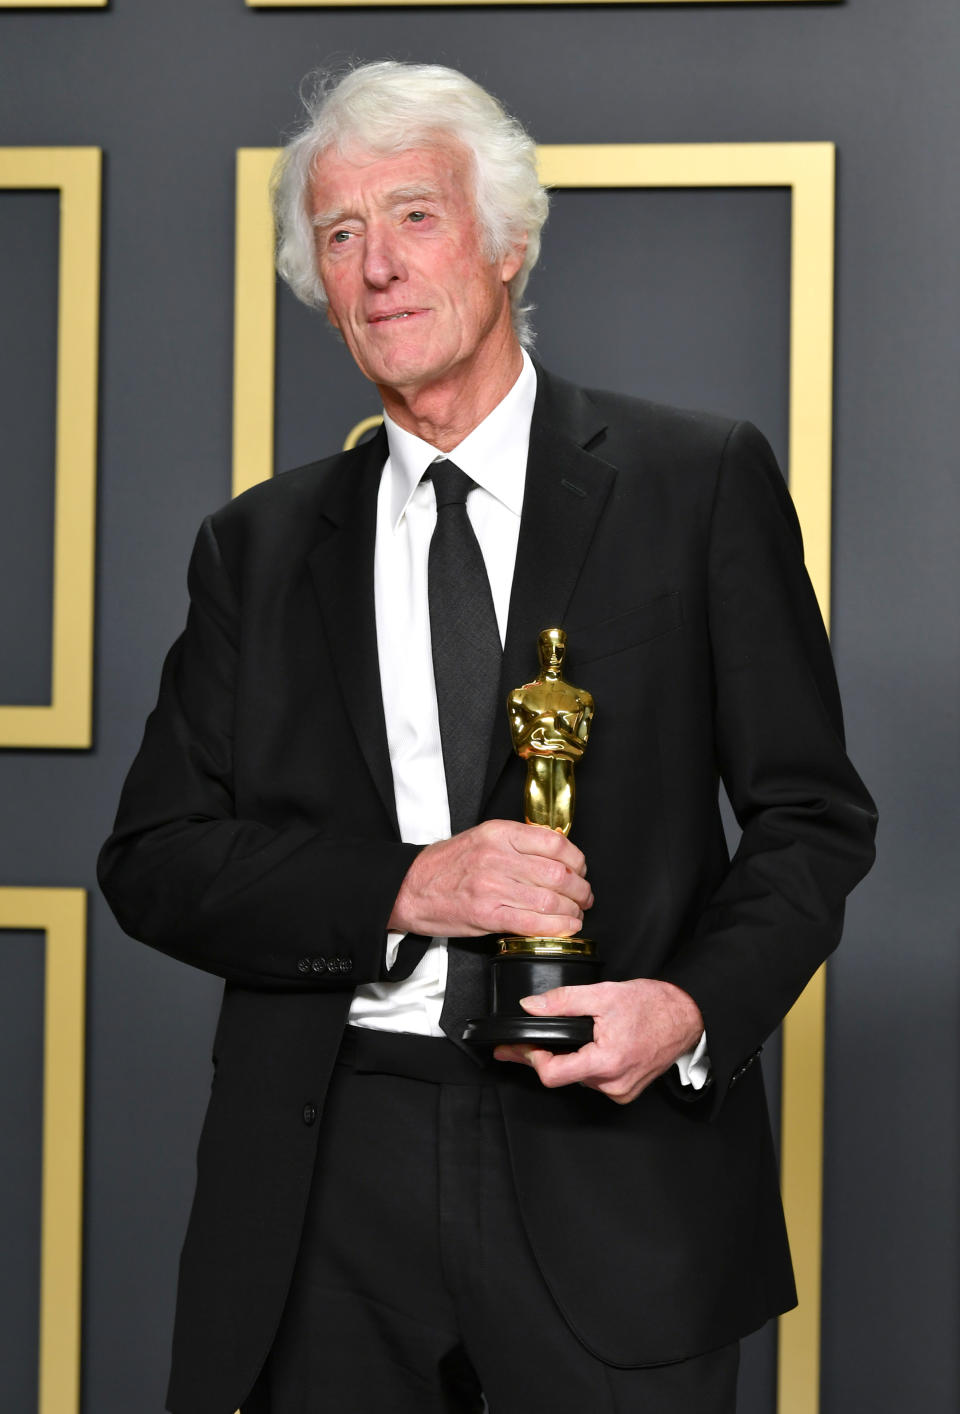 Cinematographer Roger Deakins, winner of the Cinematography award for “1917,” poses in the press room during the 92nd Annual Academy Awards at Hollywood and Highland on February 09, 2020 in Hollywood, California. (Photo by Amy Sussman/Getty Images)